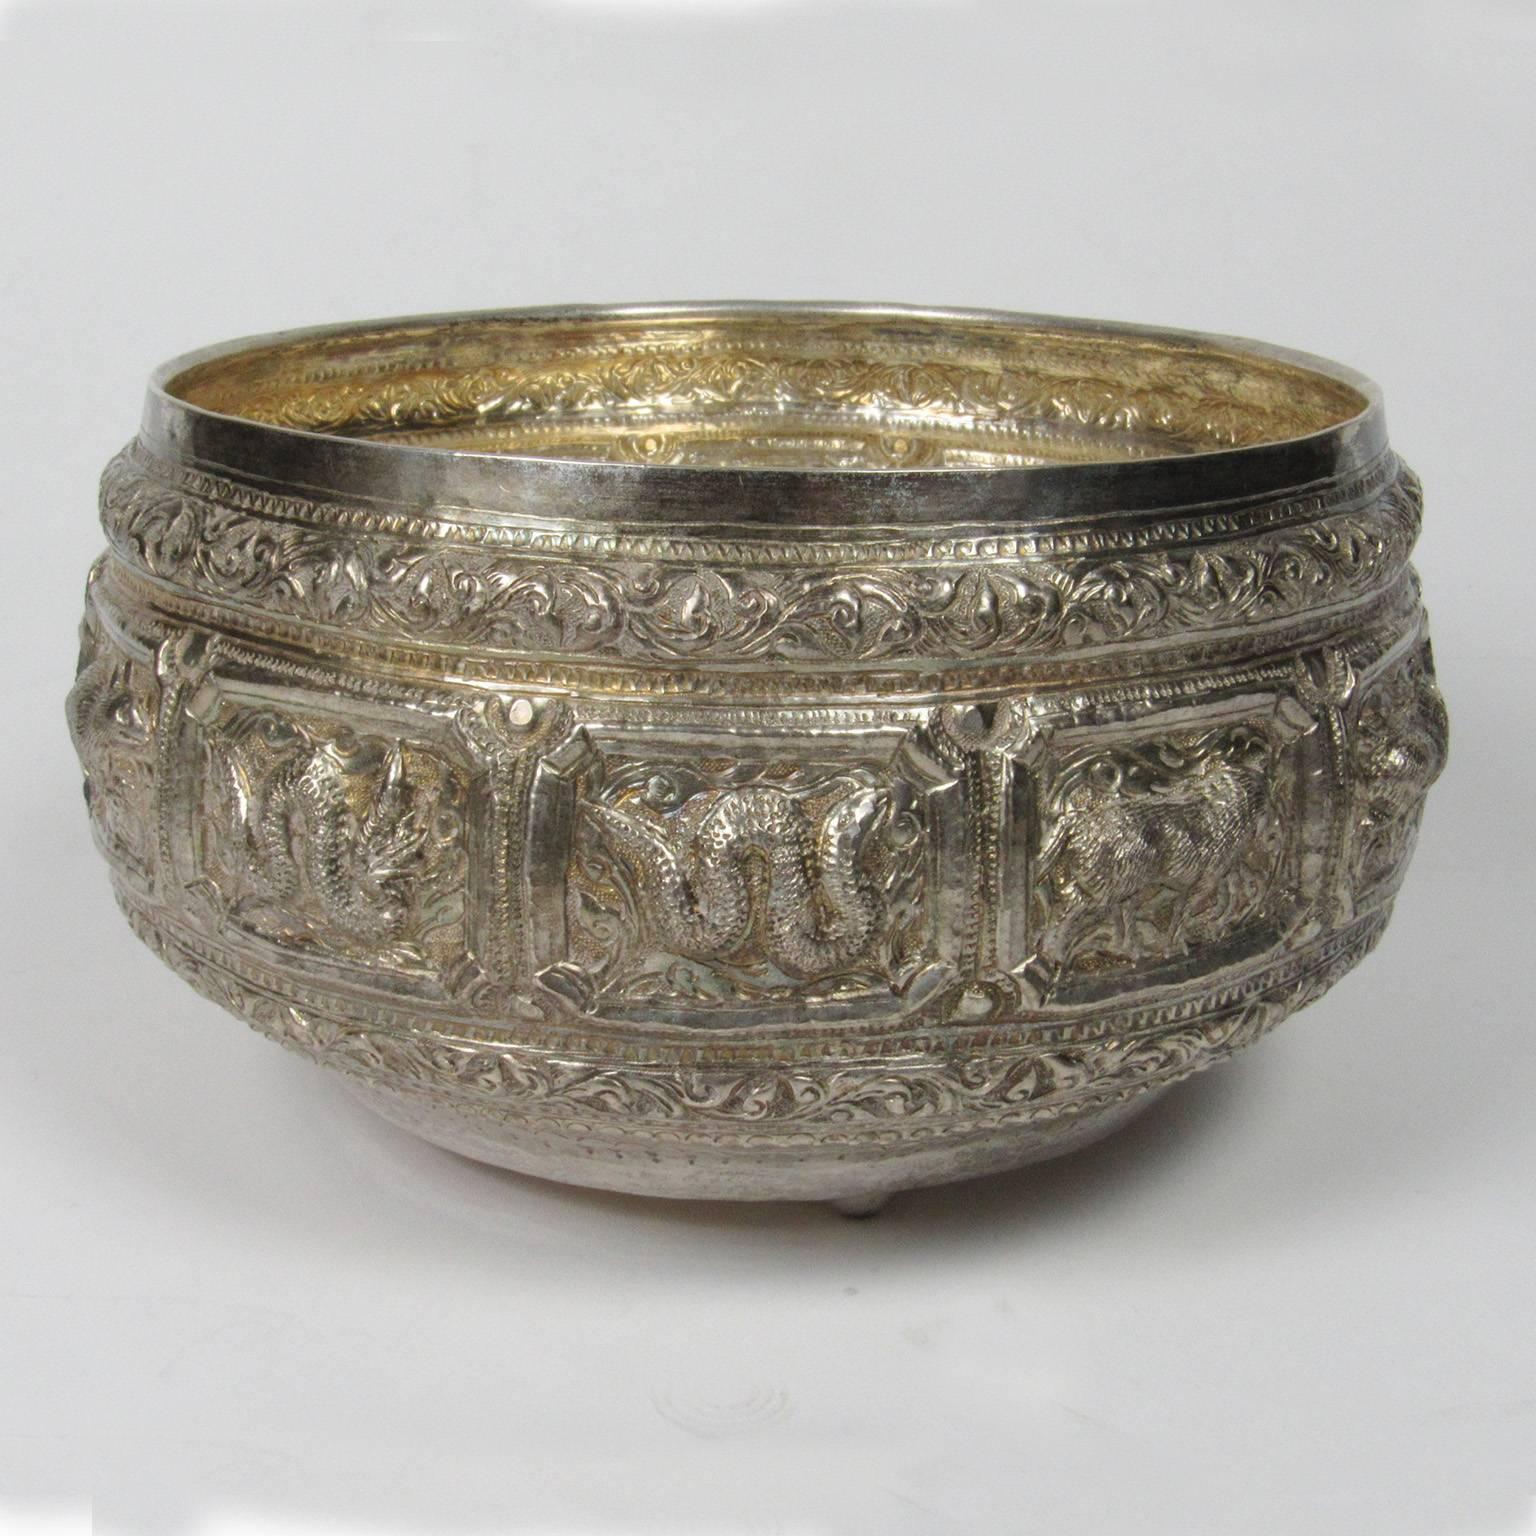 Large Burmese hand-hammered silver alms bowl with repoussé Zodiac decoration, signed on bottom. Measures: Diameter 9 in., height 5 in.